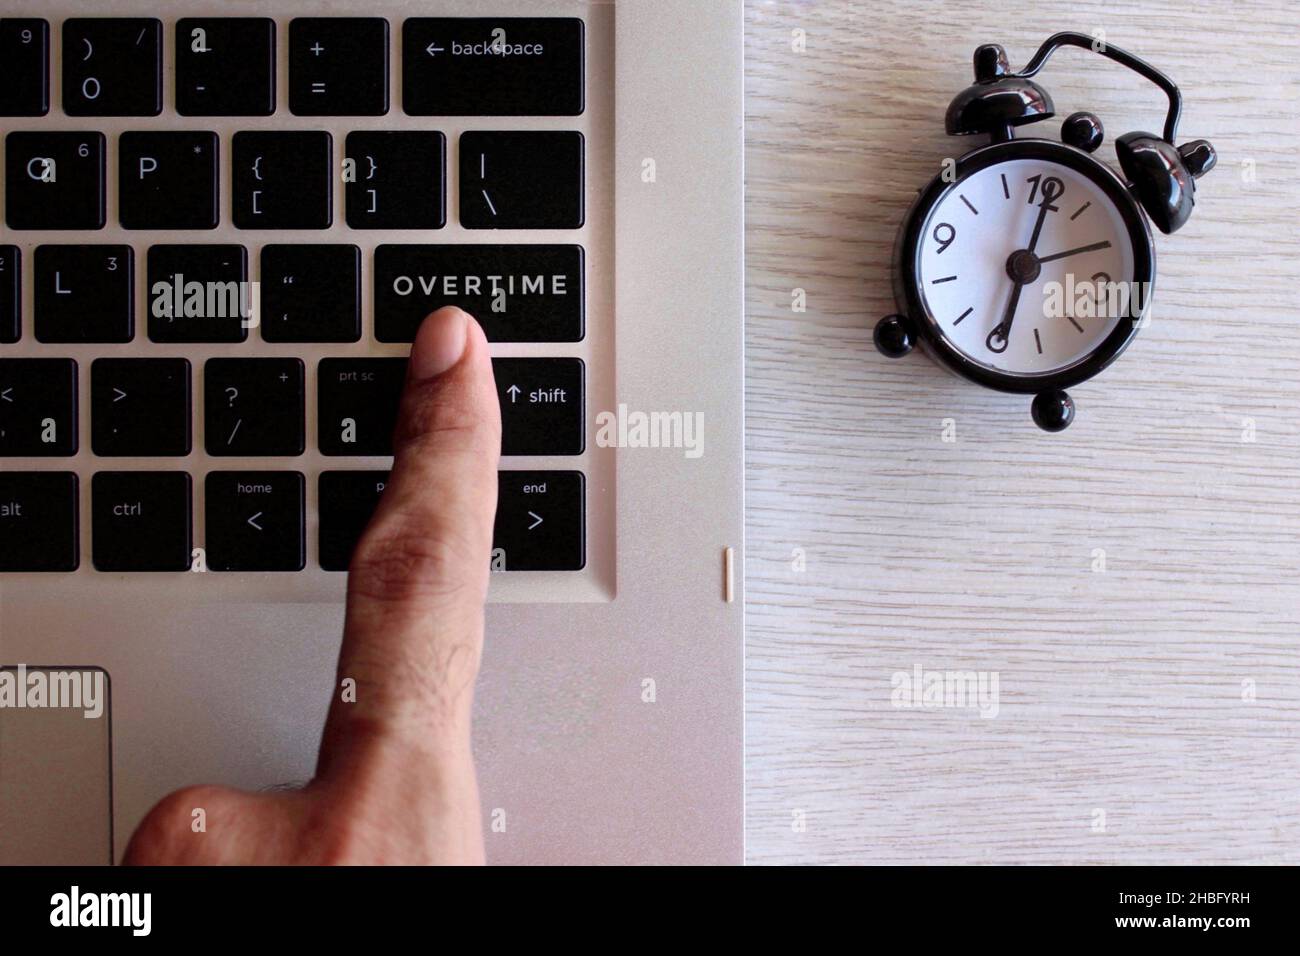 Overtime work concept. Finger pressing keyboard with text OVERTIME and black alarm clock. Stock Photo